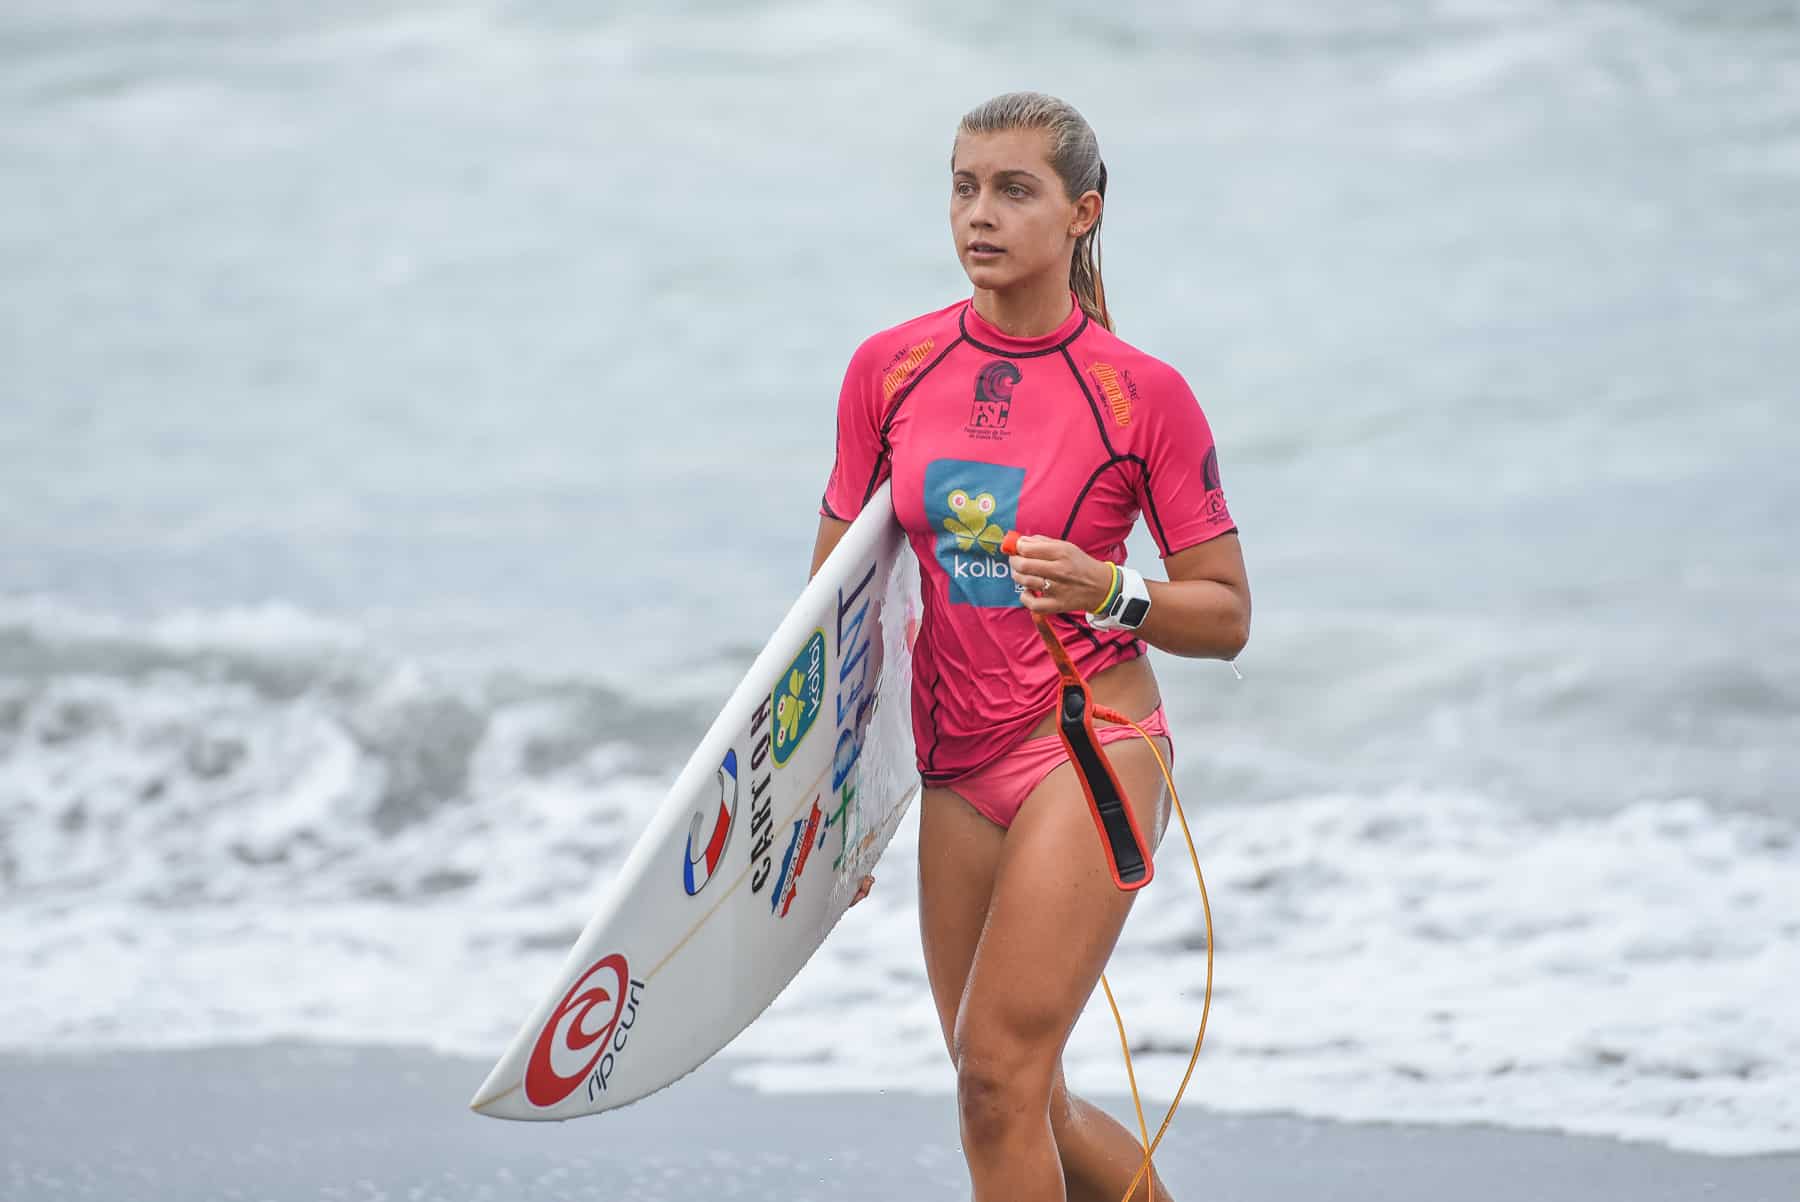 Leilani McGonagle, 15, makes up part of Costa Rica's golden generation of surfers.